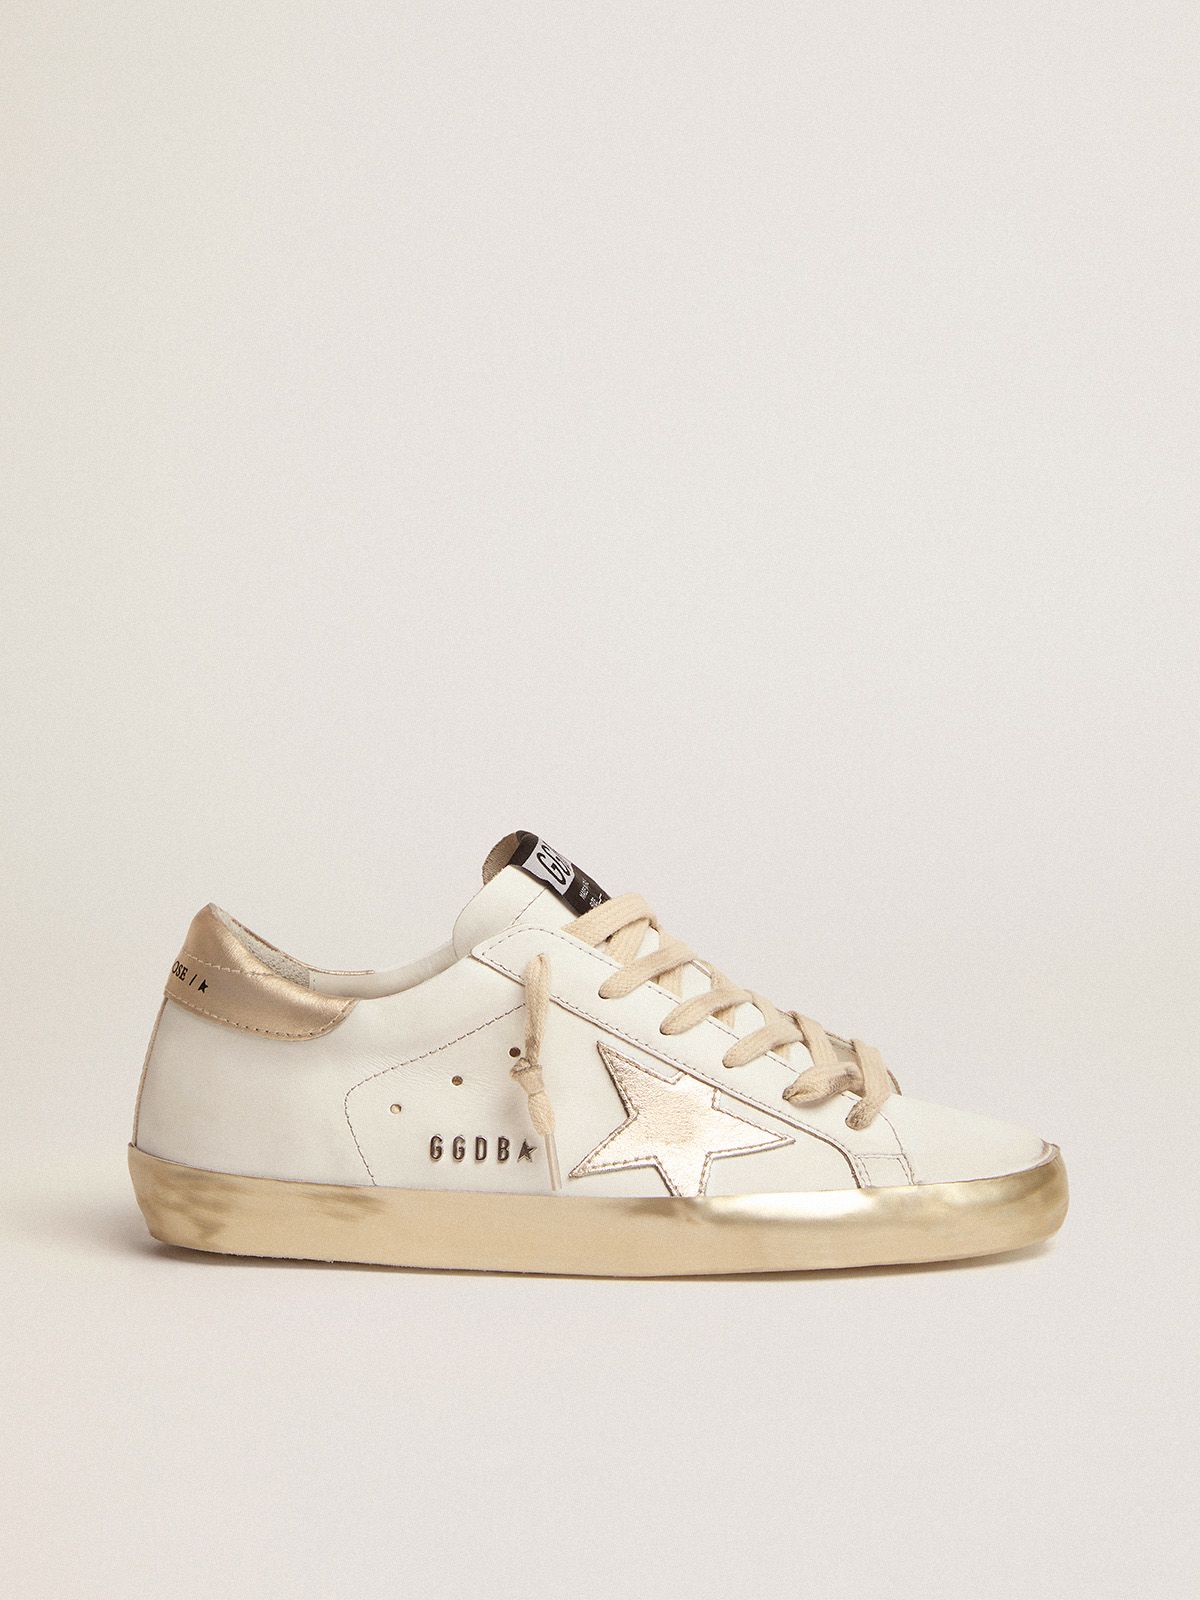 golden goose with foxing sparkle lettering metal and Super-Star gold sneakers stud